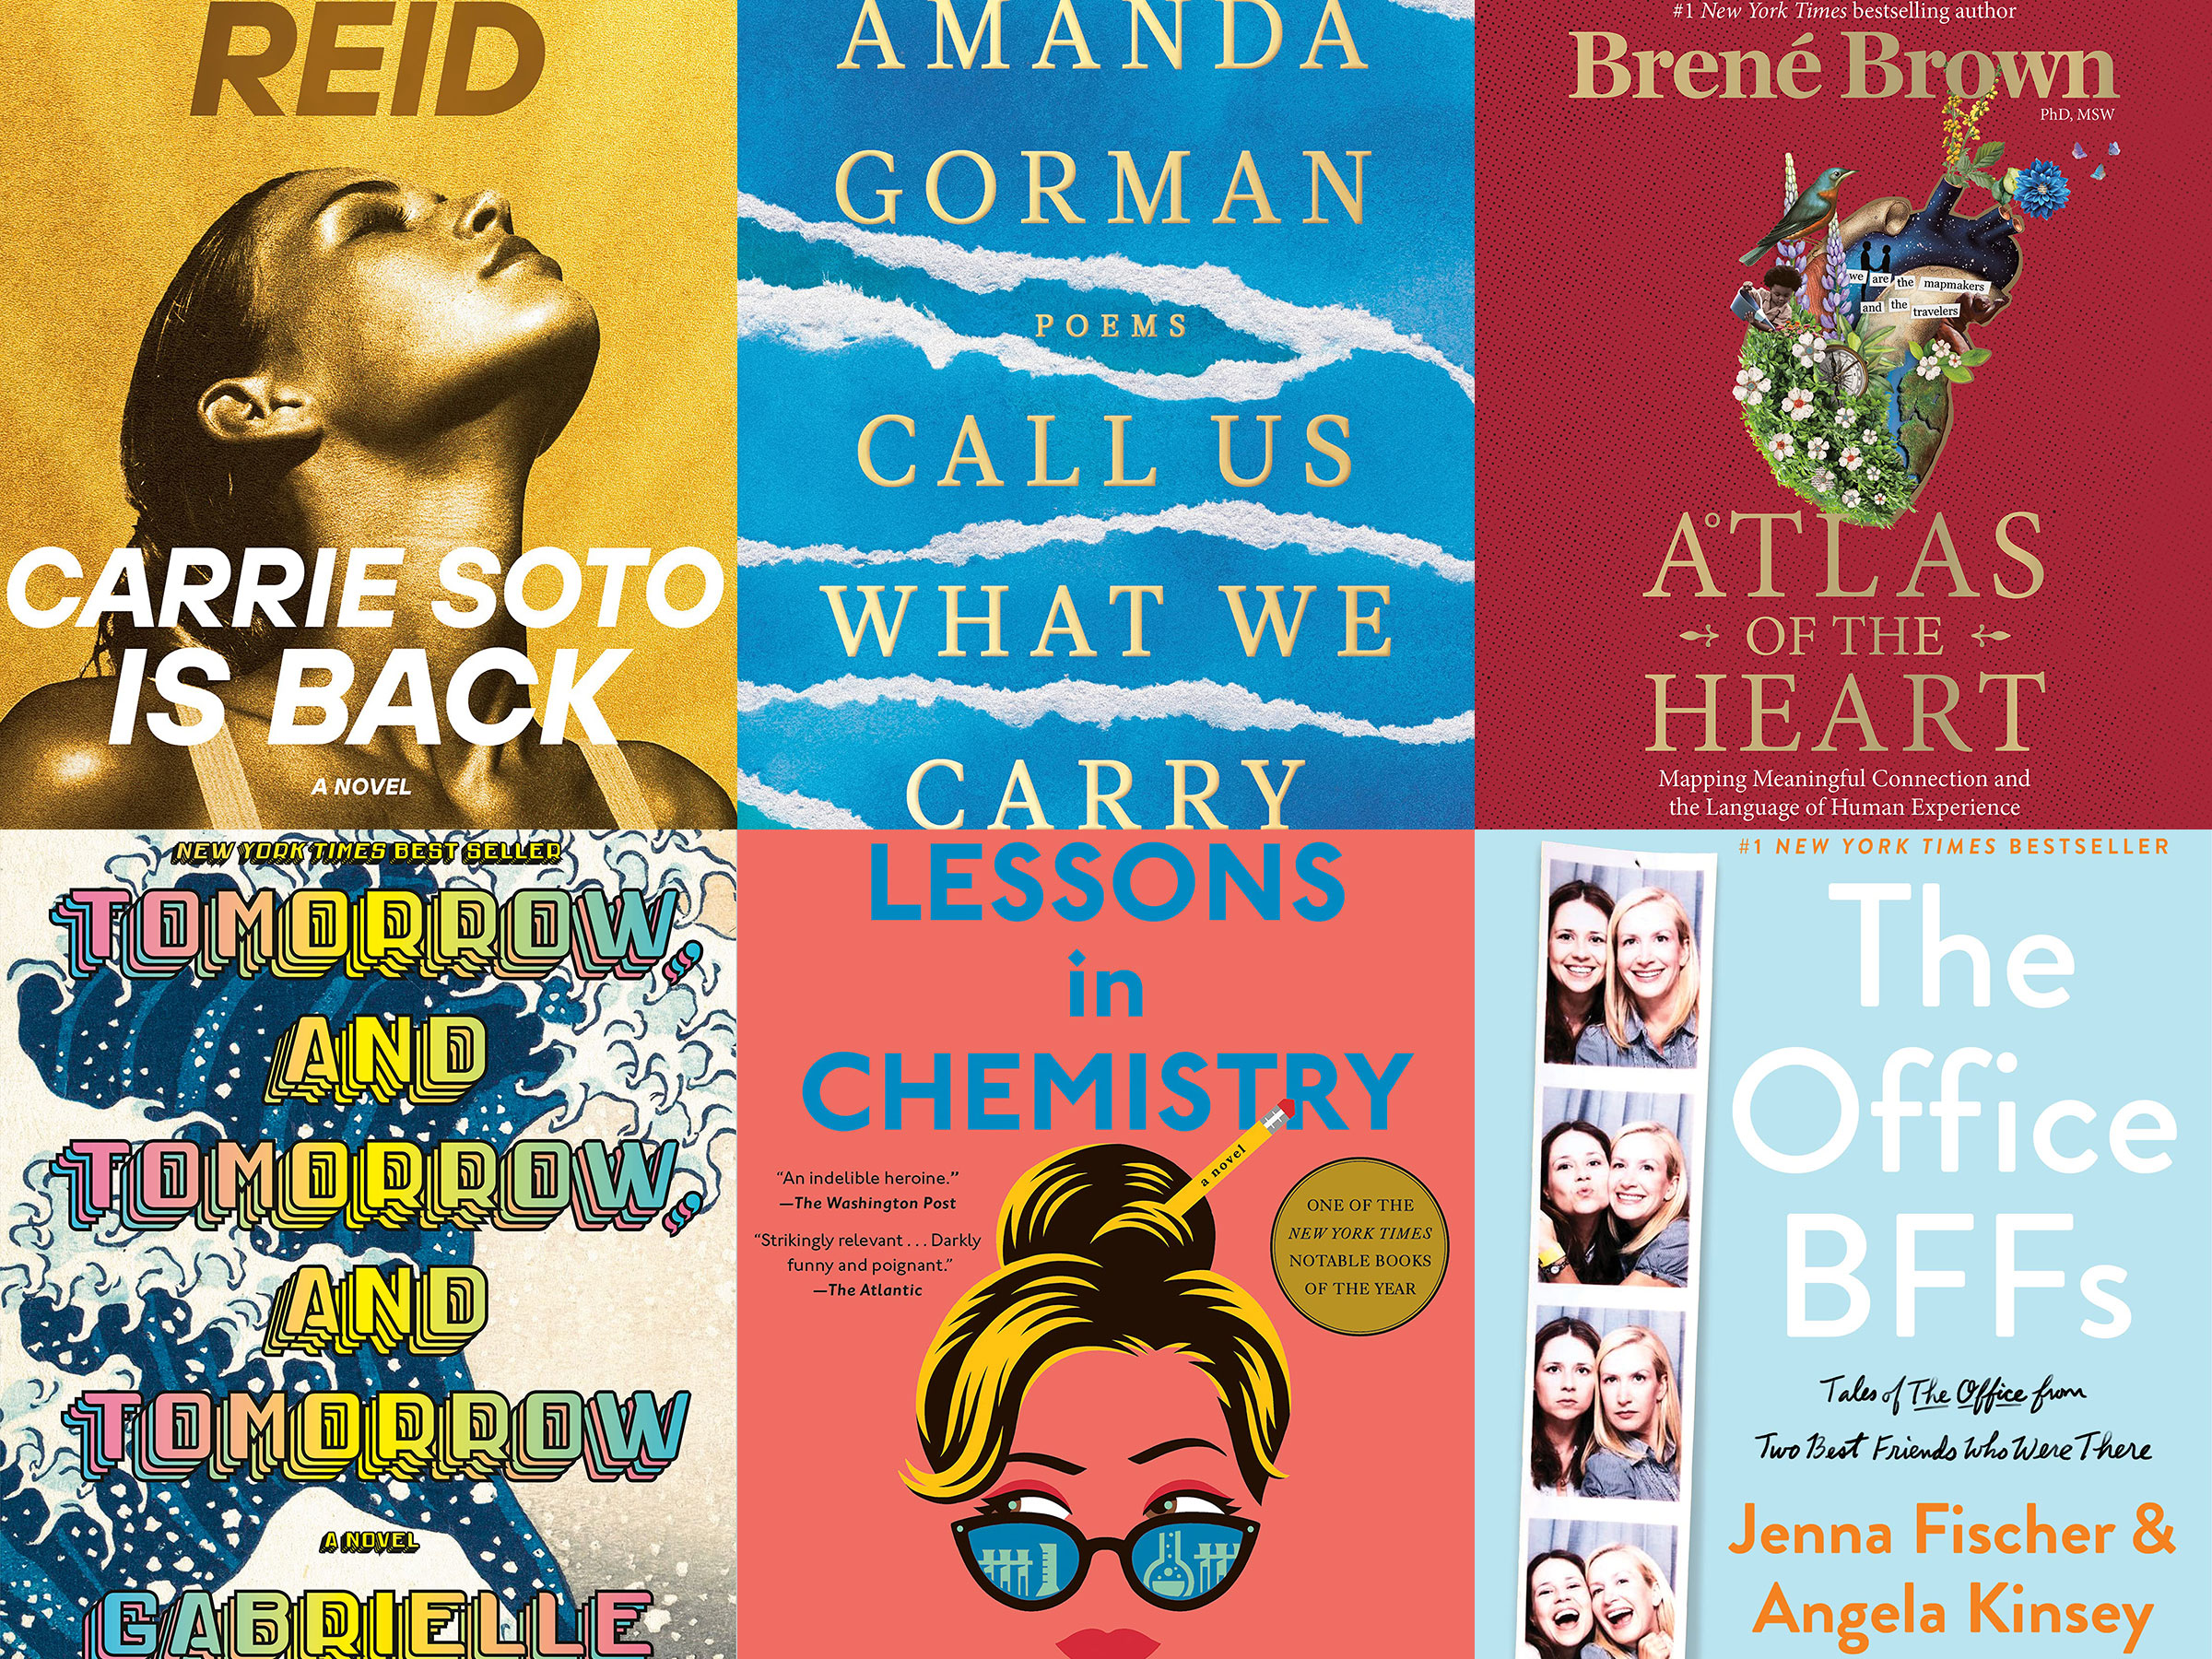 gispende vest Eller enten These Are the Best Books of 2022, According to Goodreads Readers